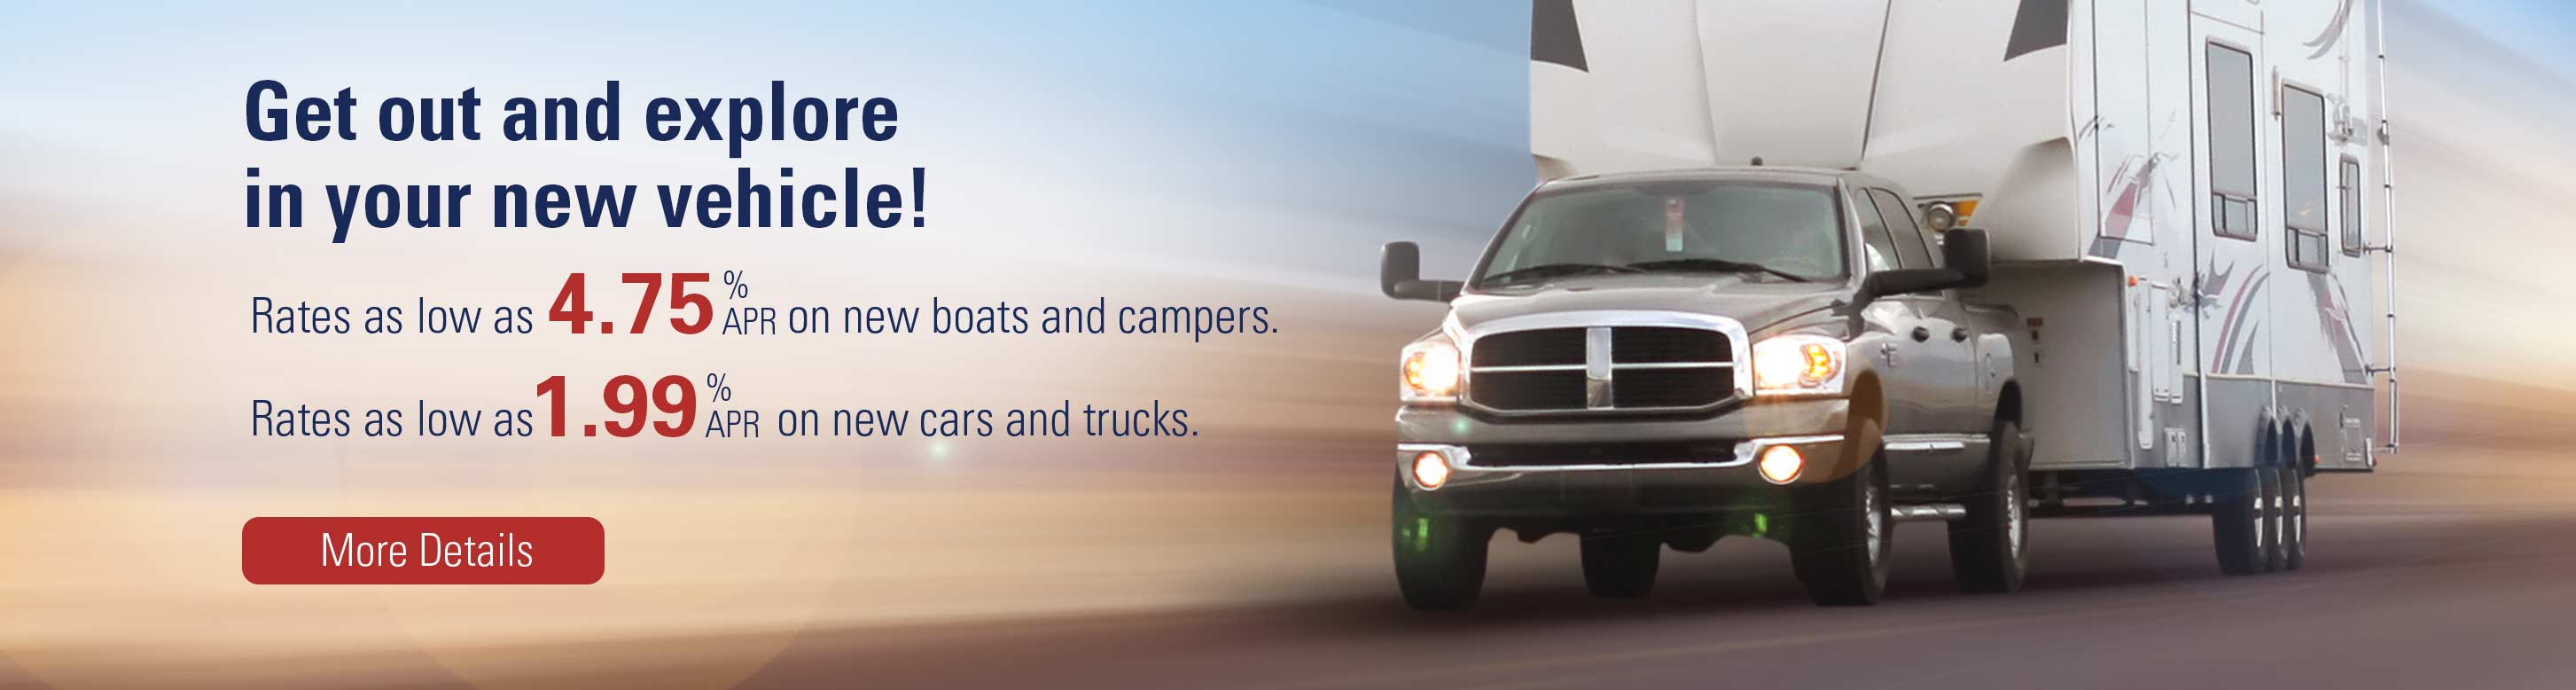 Get out and explore in your new vehicle! Rates as low as 4.75% apr on new boats and campers. Rates as low as 1.99% apr on new cars and trucks. More Details.